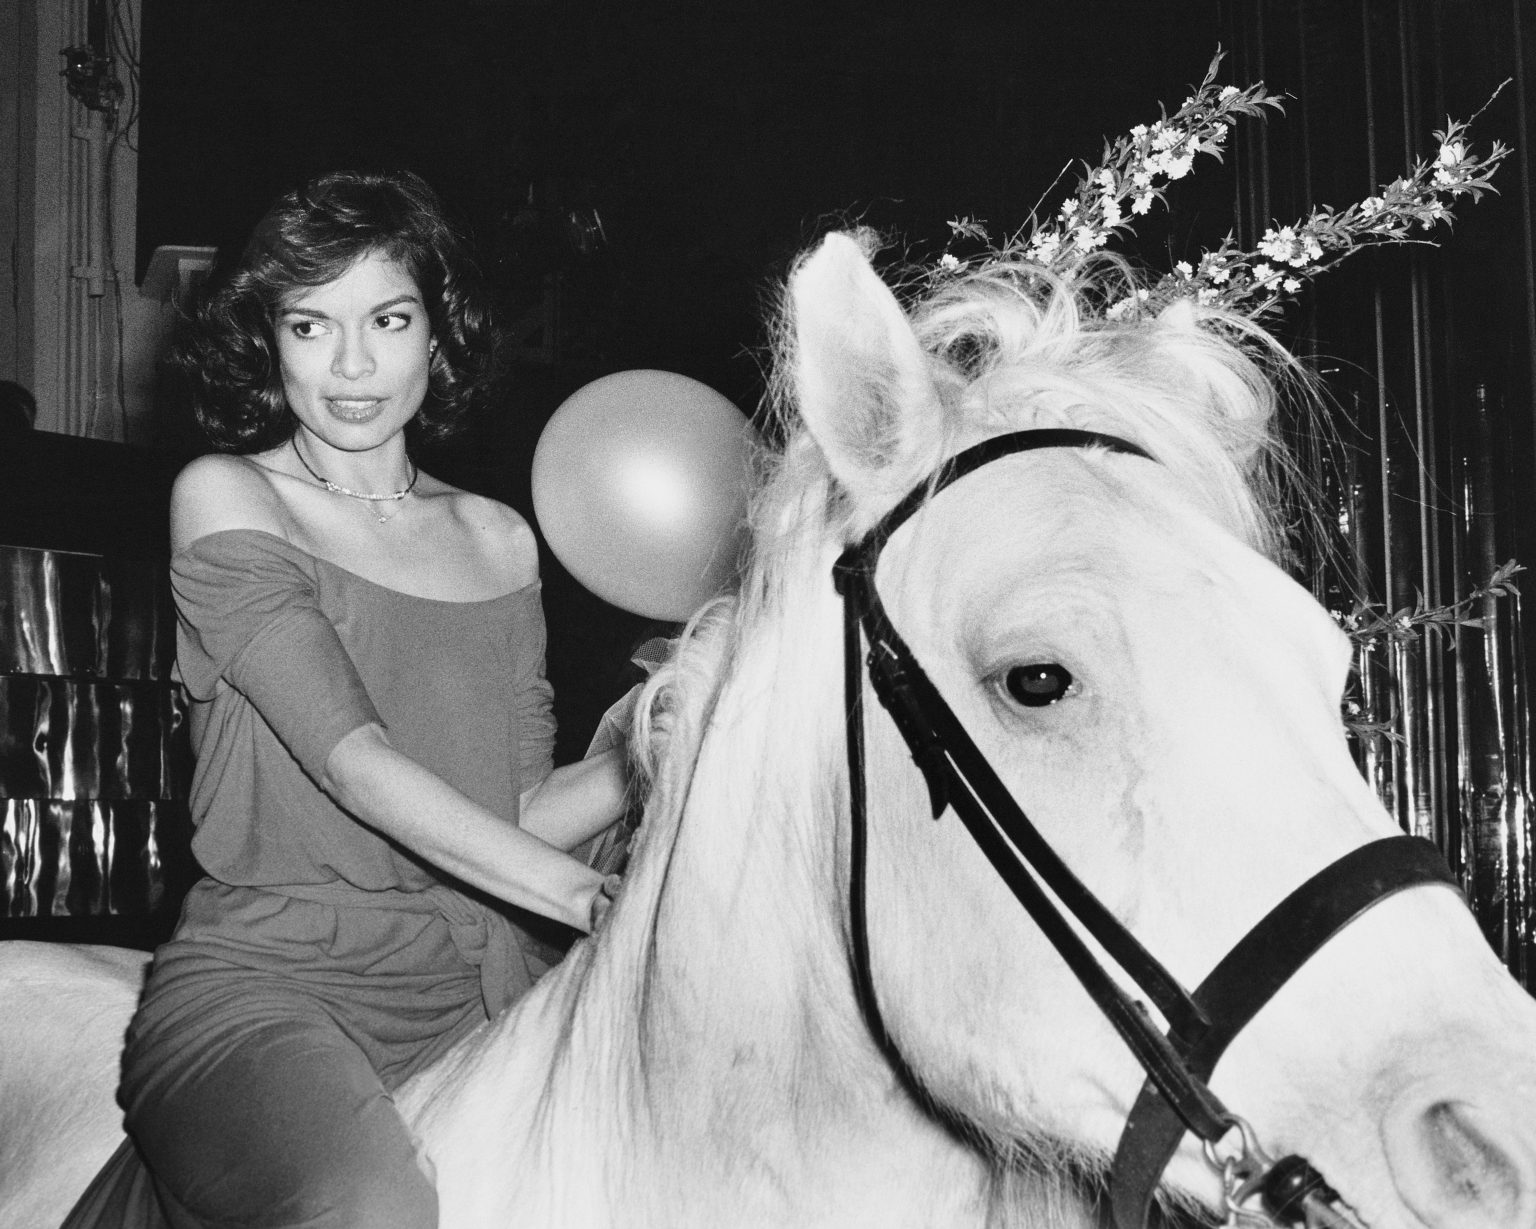 Bianca Jagger rides in on a white horse at during her birthday celebrations at Studio 54 in New York, May 1977. (Photo by Rose Hartman/Getty Images)